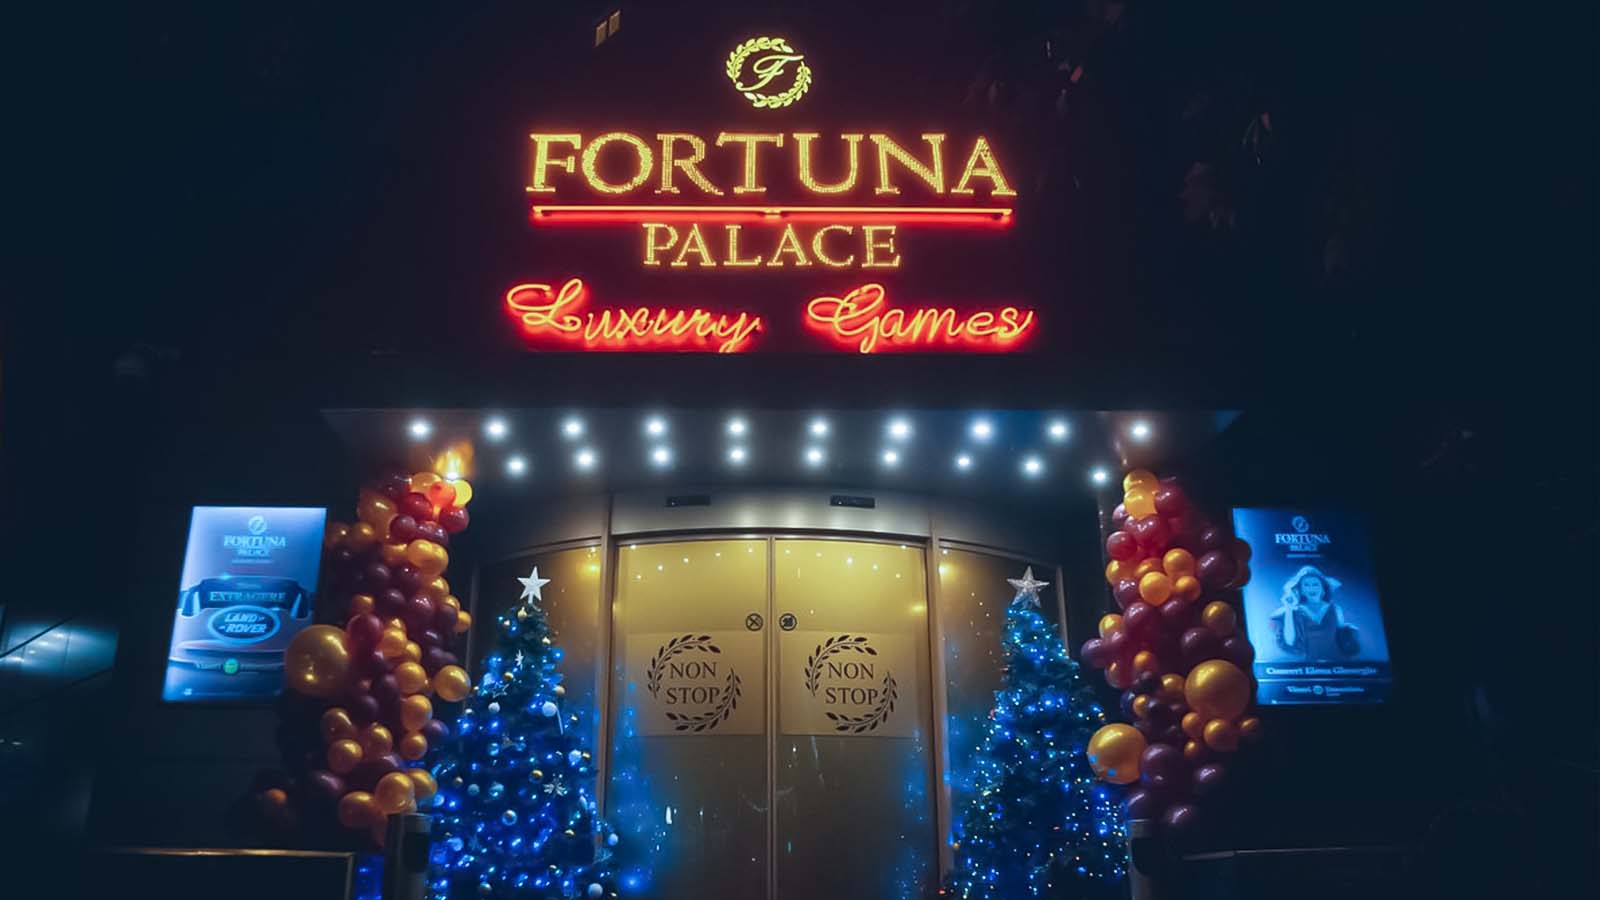 Fortuna Palace Luxury Games